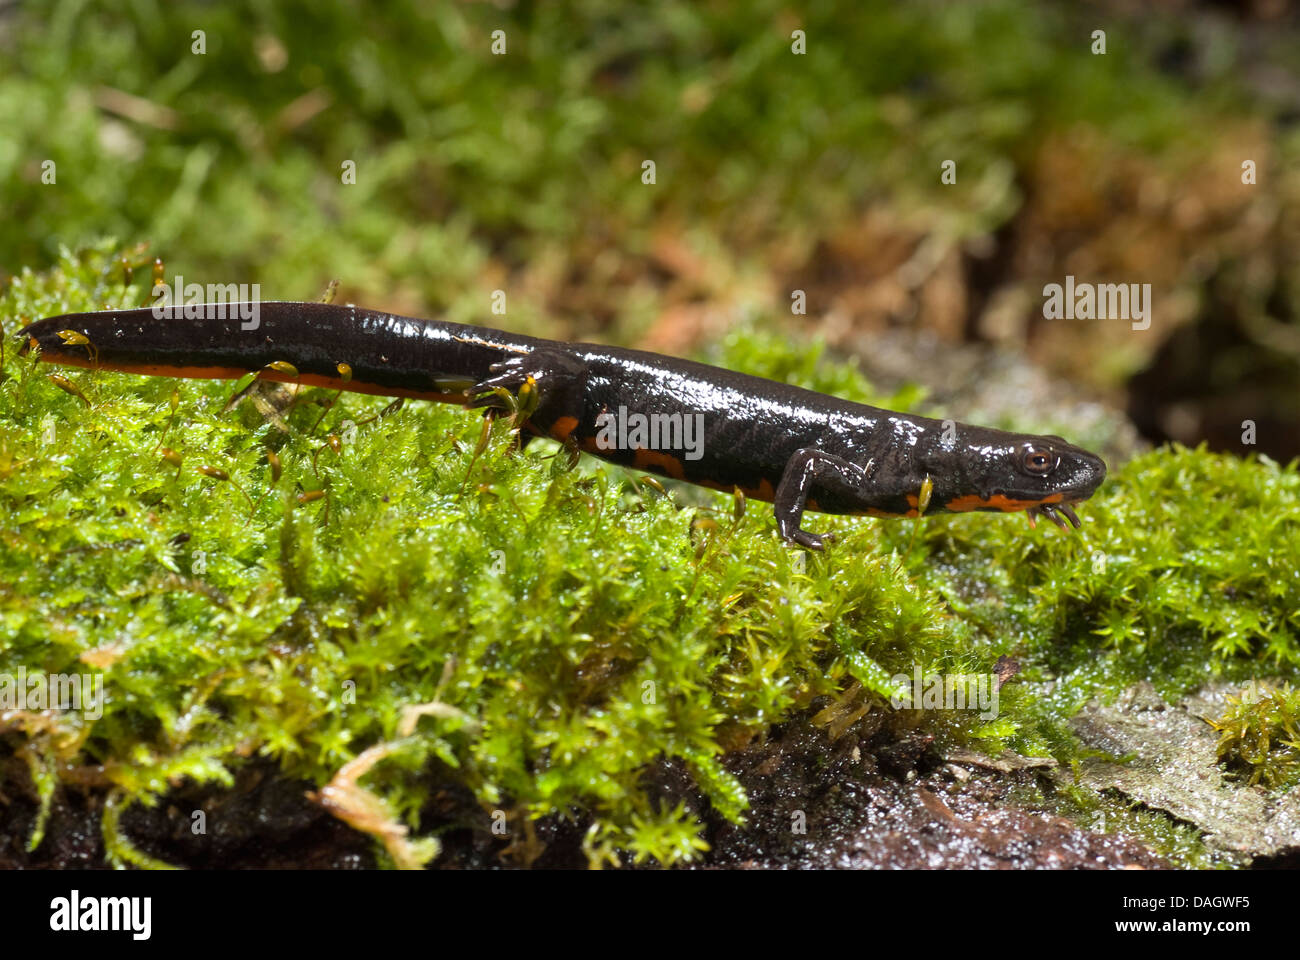 Chinese dwarf newt, Chinese fire bellied newt (Cynops orientalis), on moss Stock Photo